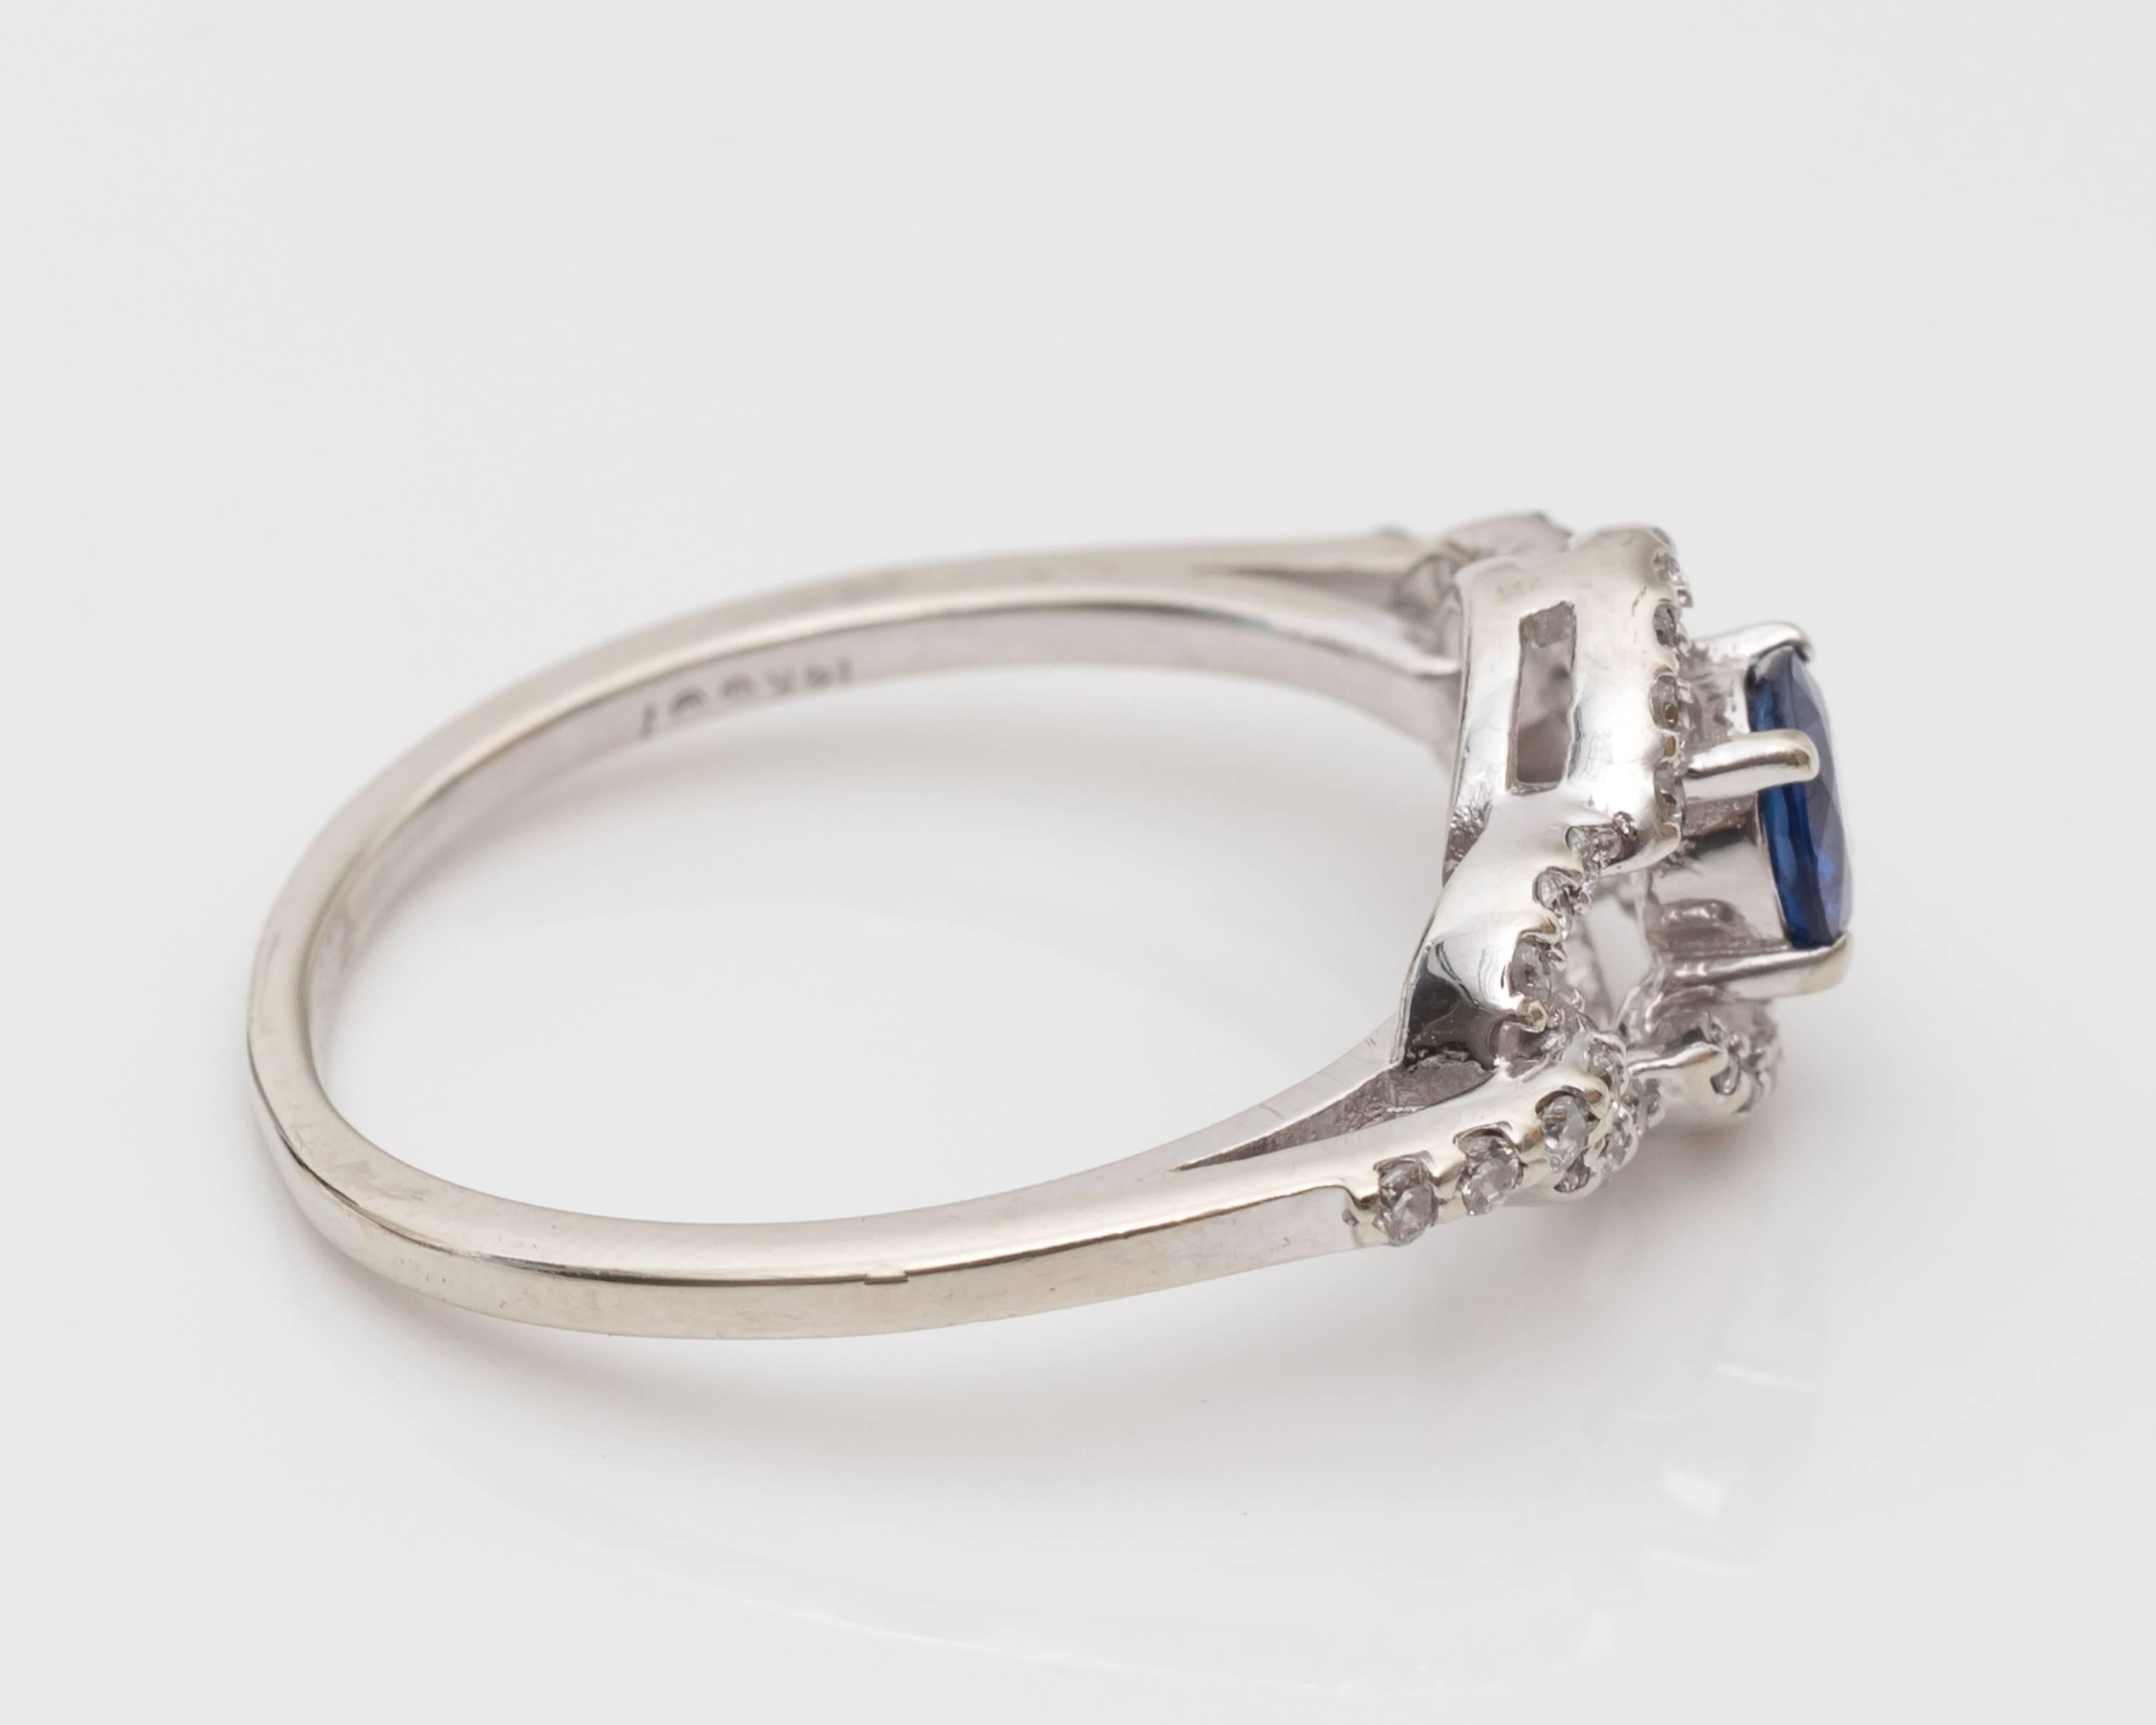 Gorgeous Sapphire and 14 Karat White Gold Diamond Ring
Center Sapphire - vivid blue color, weighing 0.40 carats total, and round cut.
Diamonds - 0.40 carats total offering so much sparkle and shine! 

The sapphire is mounted in a four-prong frame